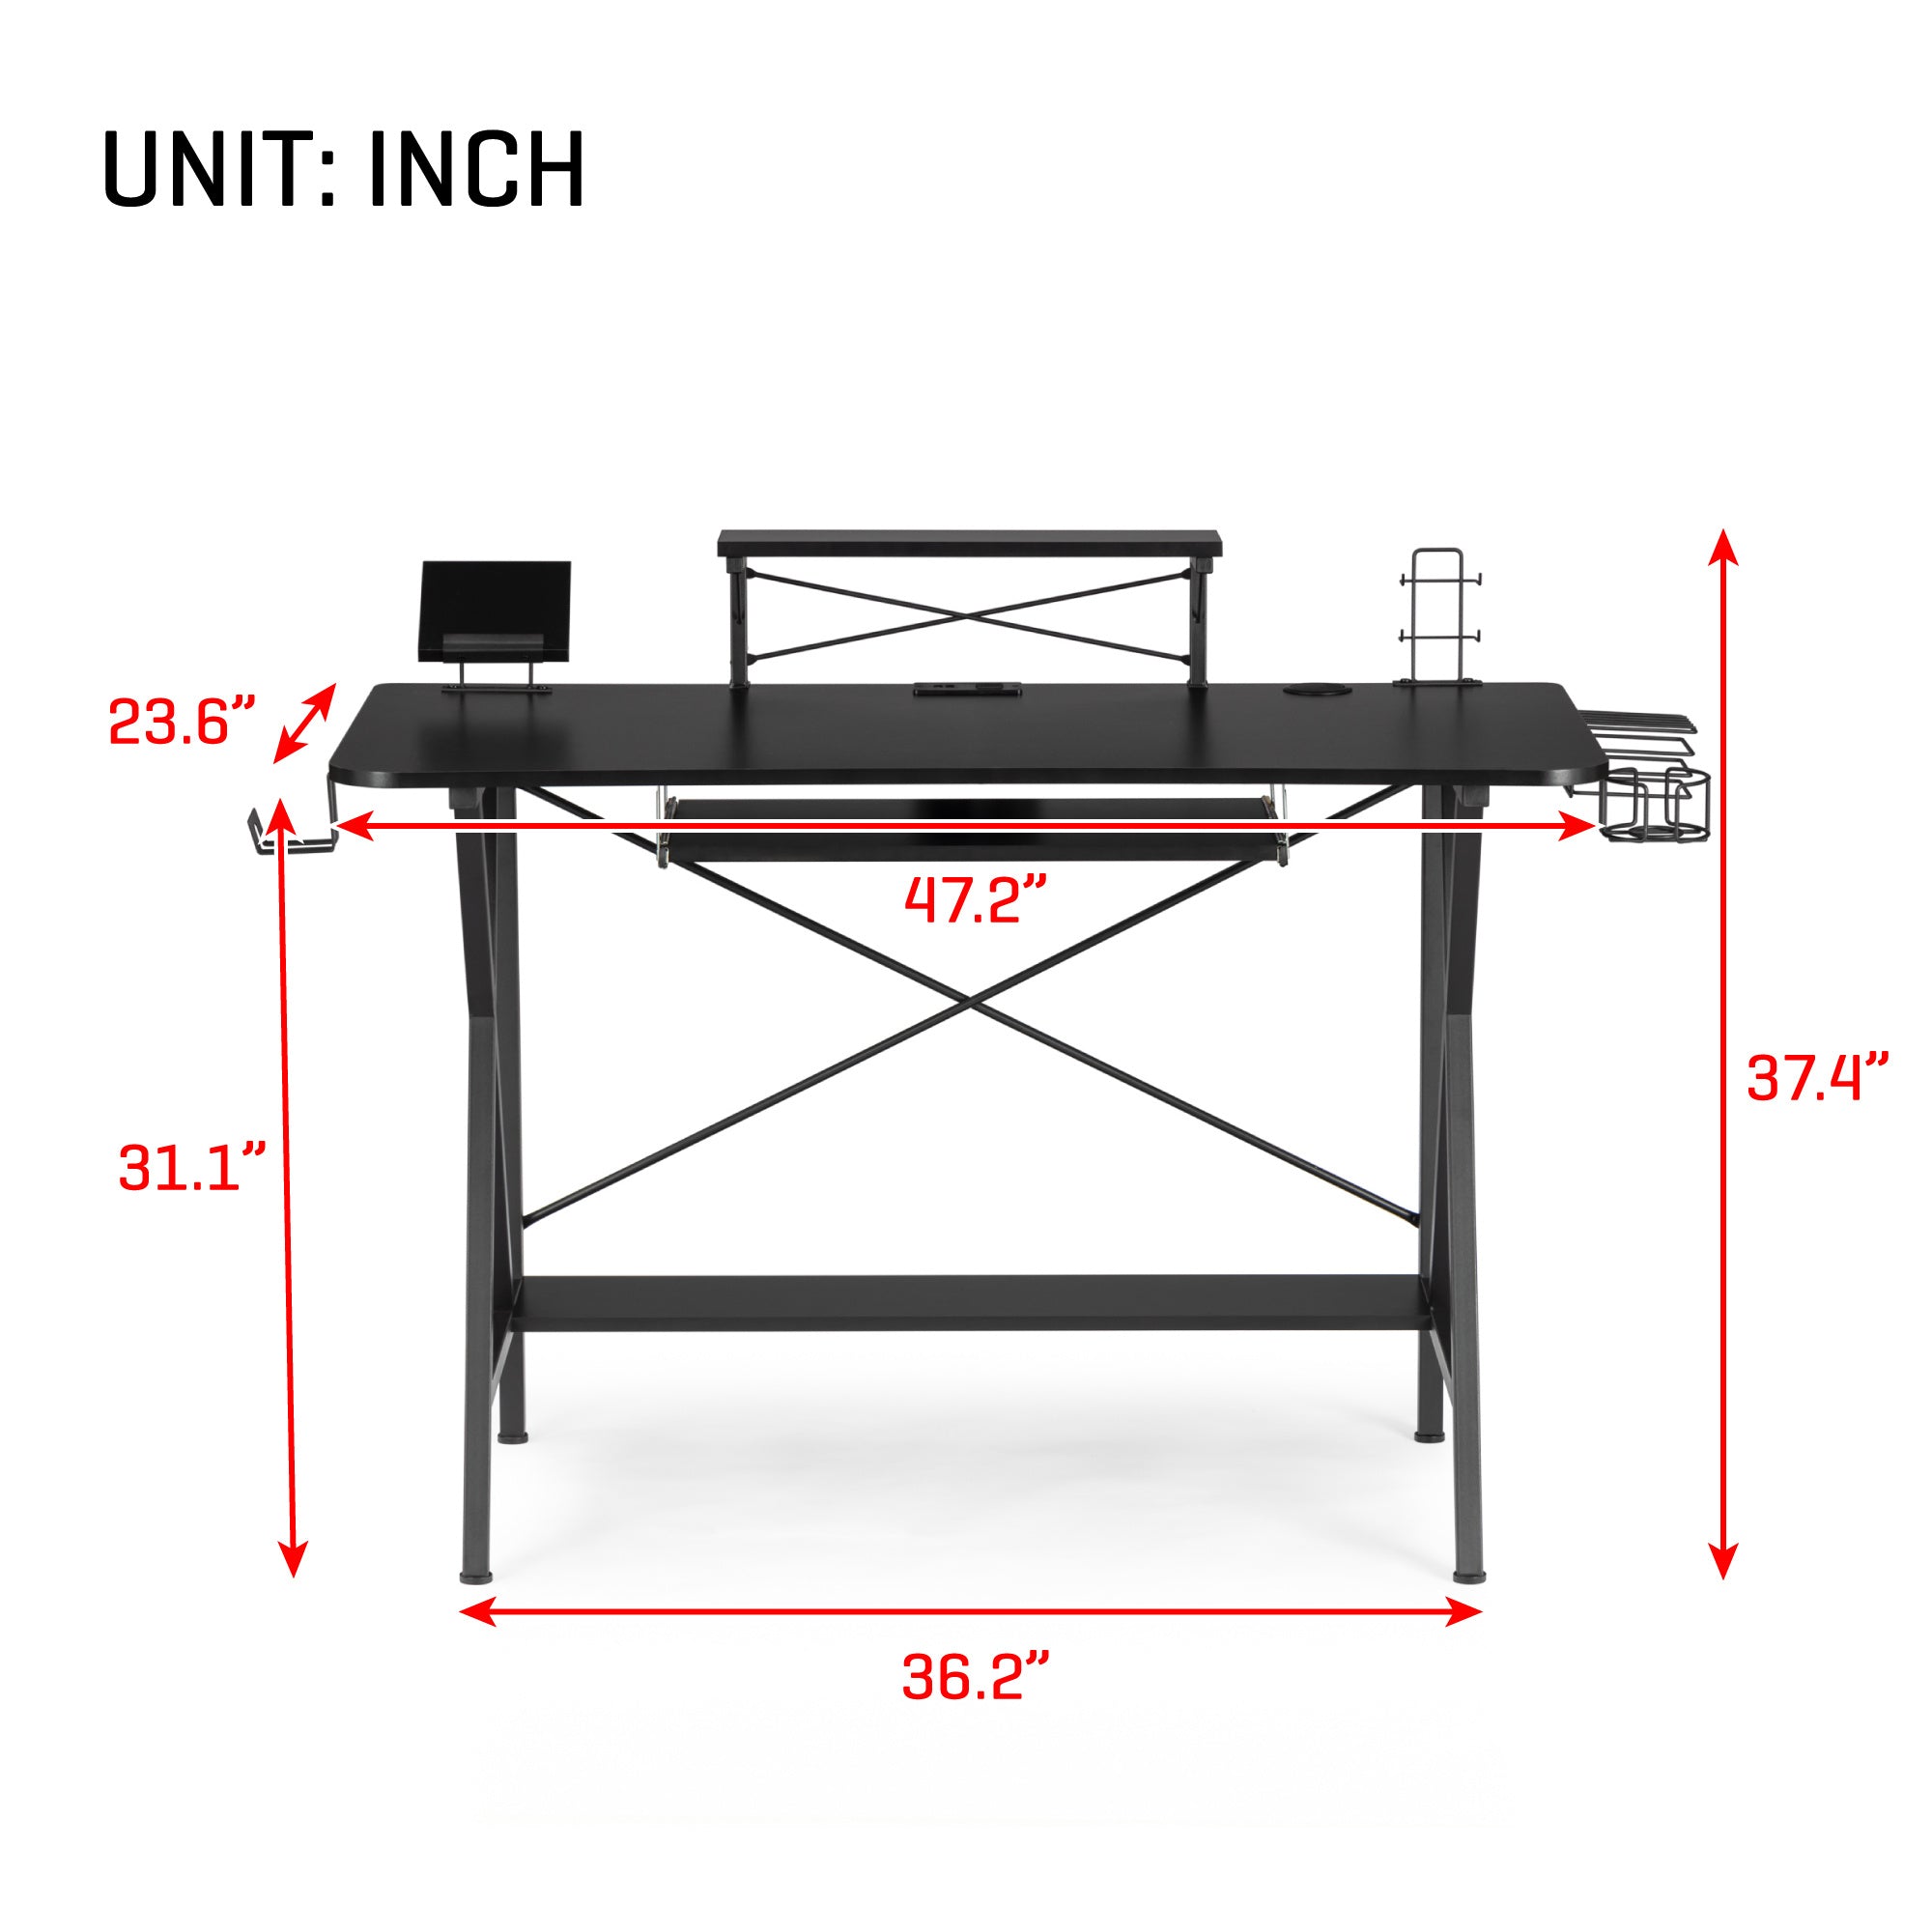 47" Gaming Desk Table, E-Sports Computer Desk, Gaming Workstation Desk, PC Stand Shelf Keyboard stand Power Strip with USB Cup Holder & Headphone Hook Home Office Desk Gamer Desk Writing Table